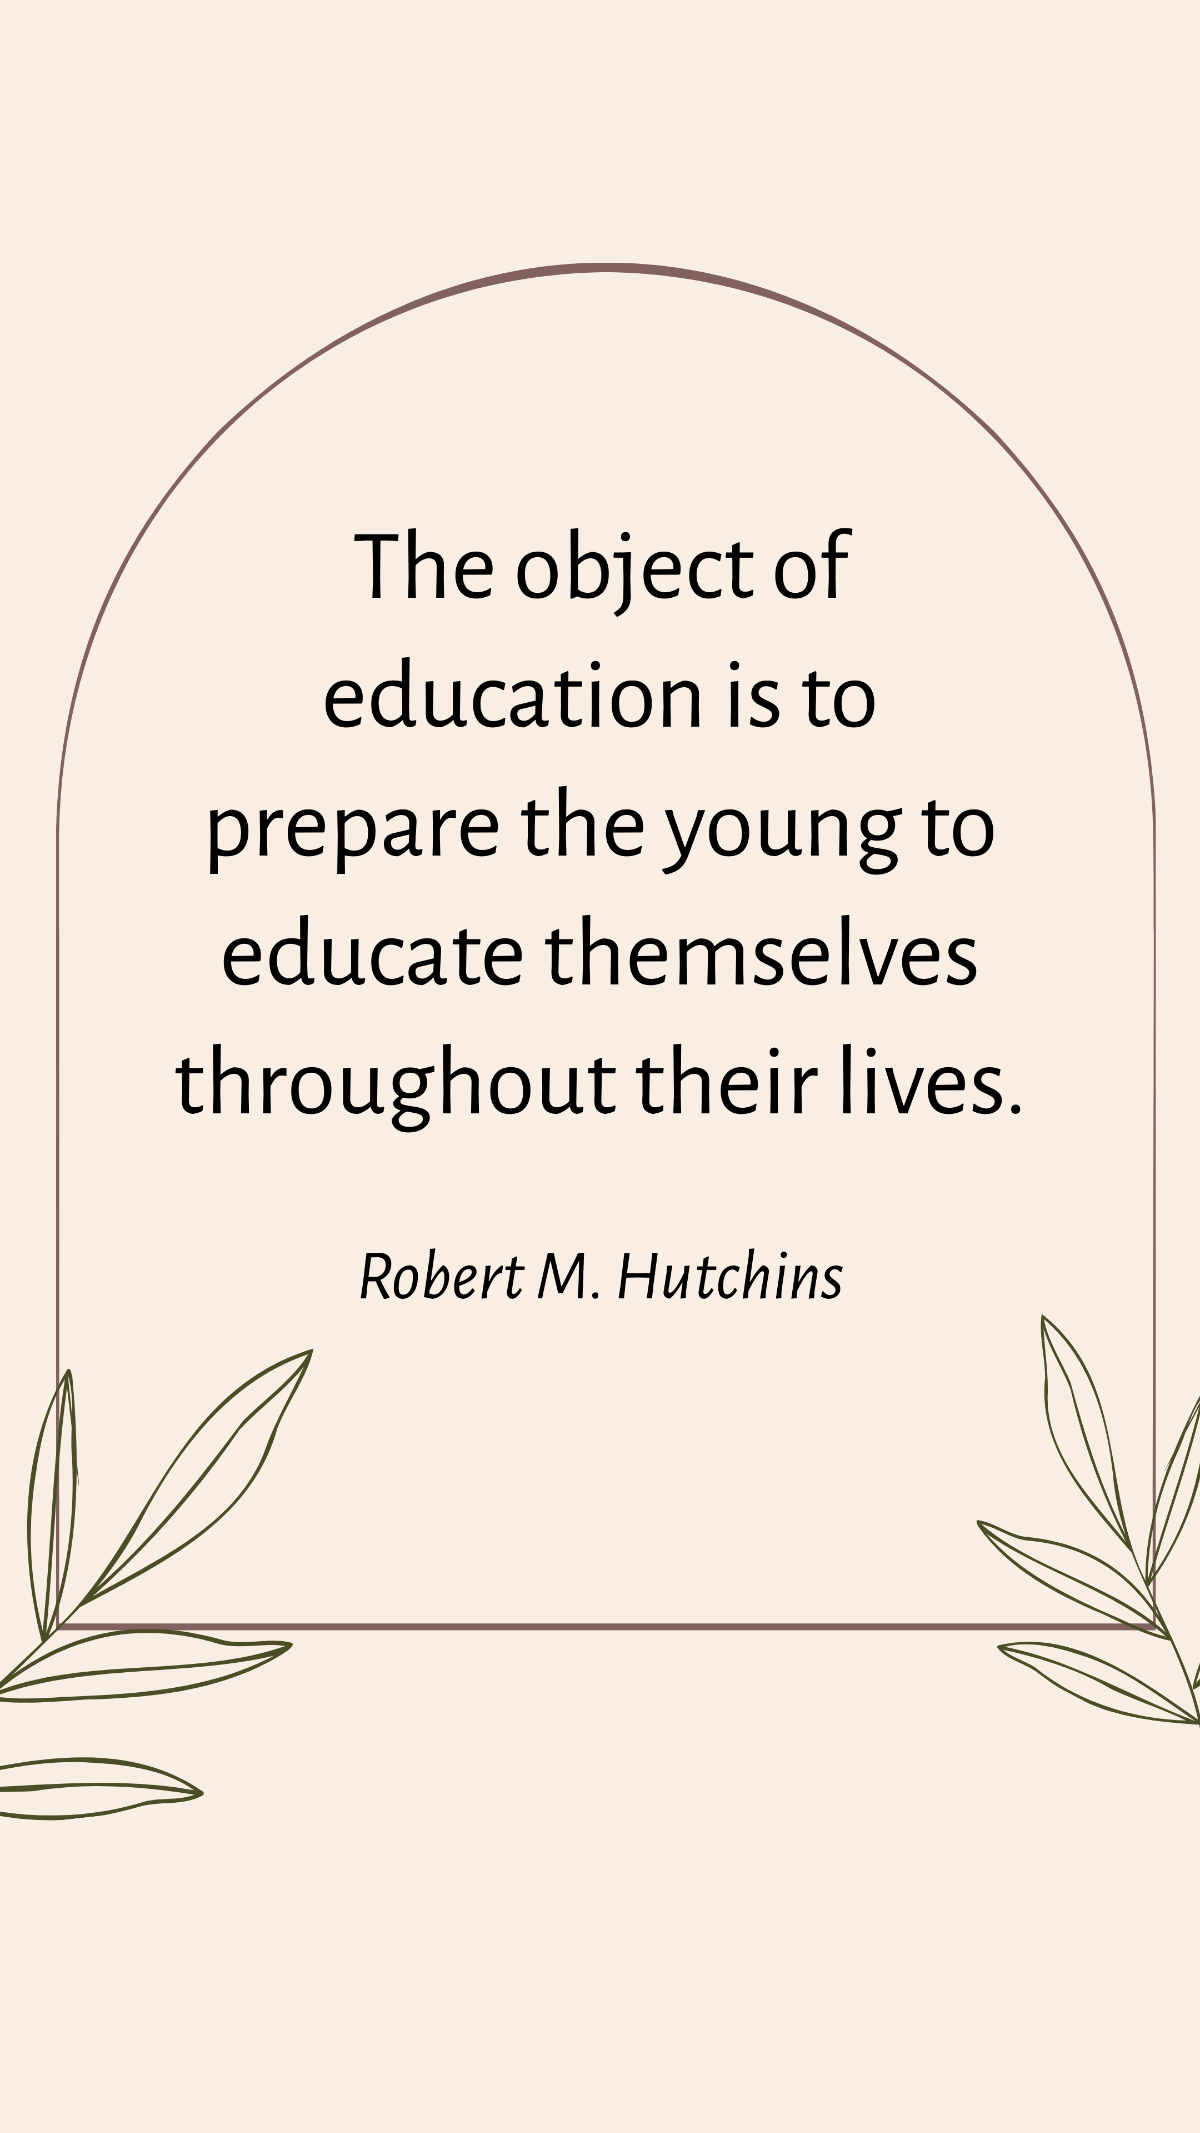 Robert M. Hutchins - The object of education is to prepare the young to educate themselves throughout their lives. Template